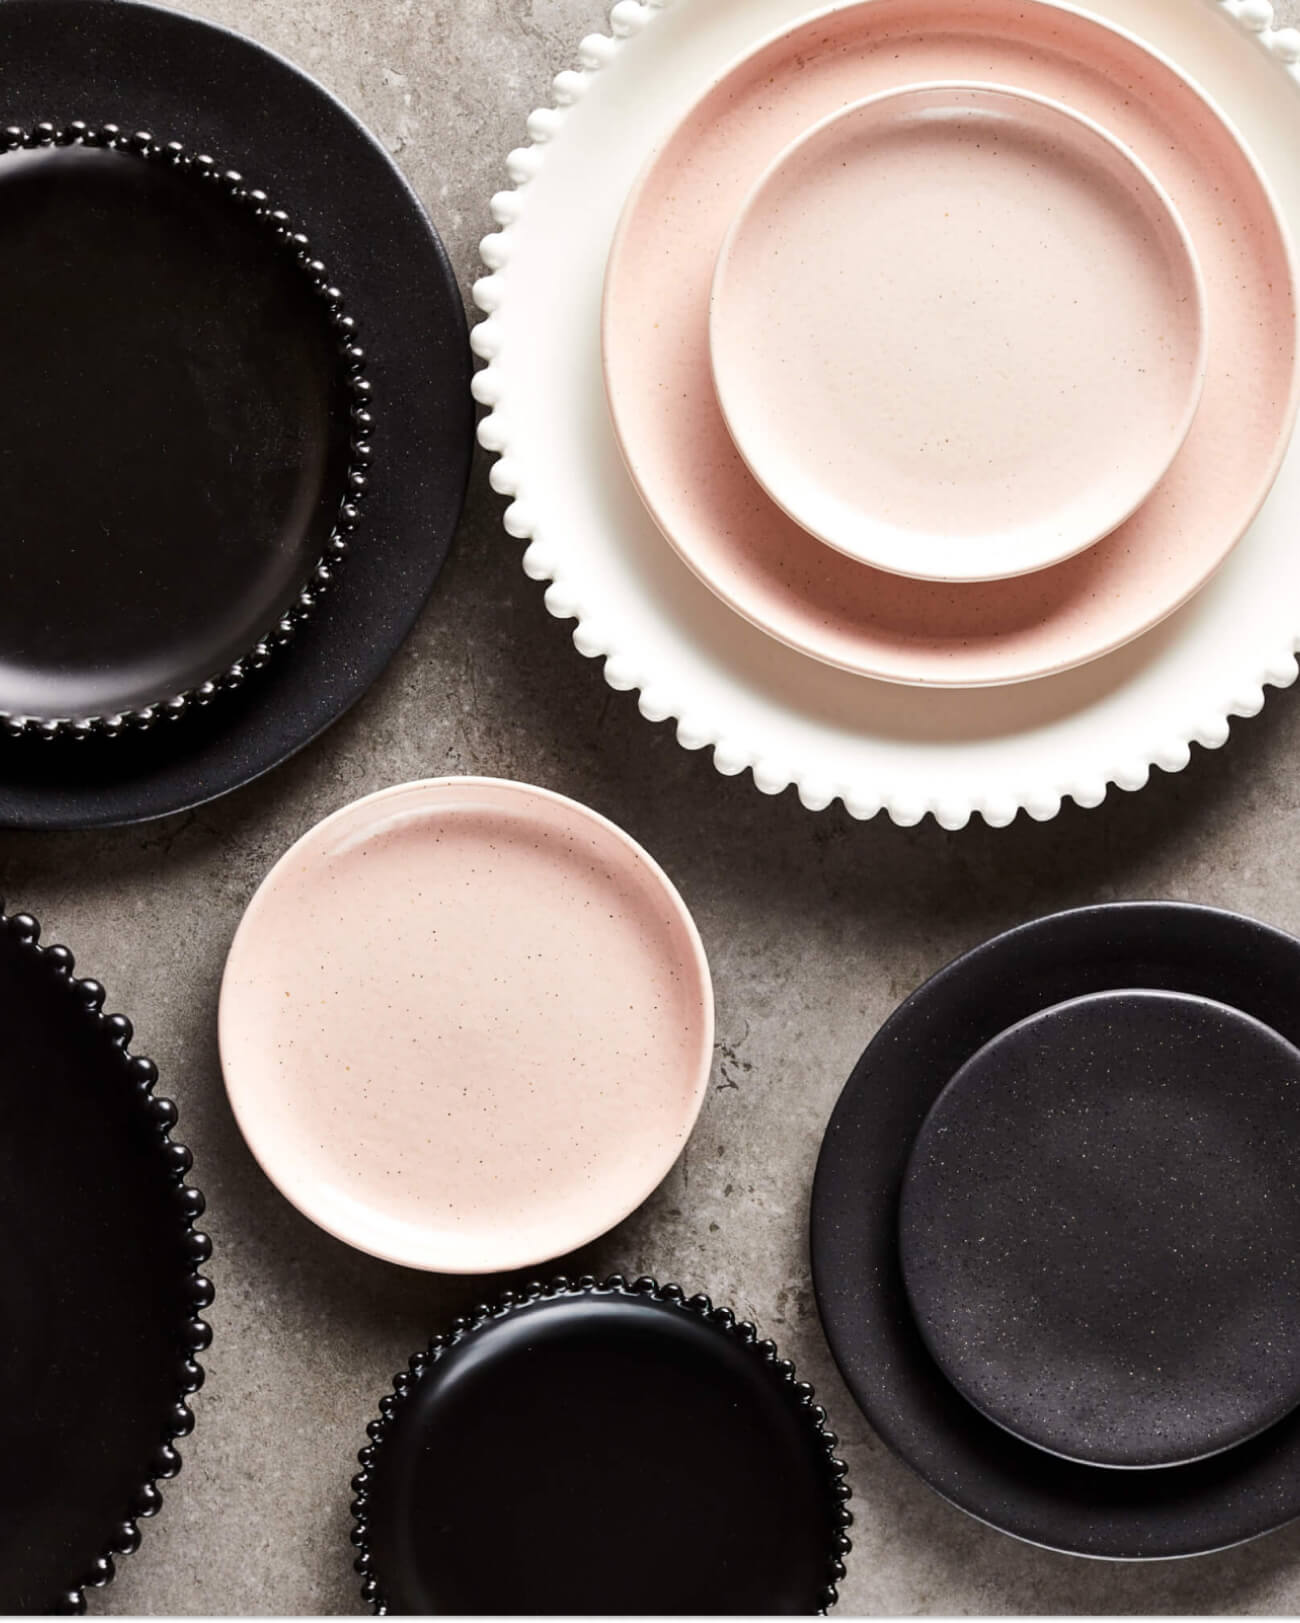 Contrasting crockery and dinnerware in white, pink and black from The Social Kitchen